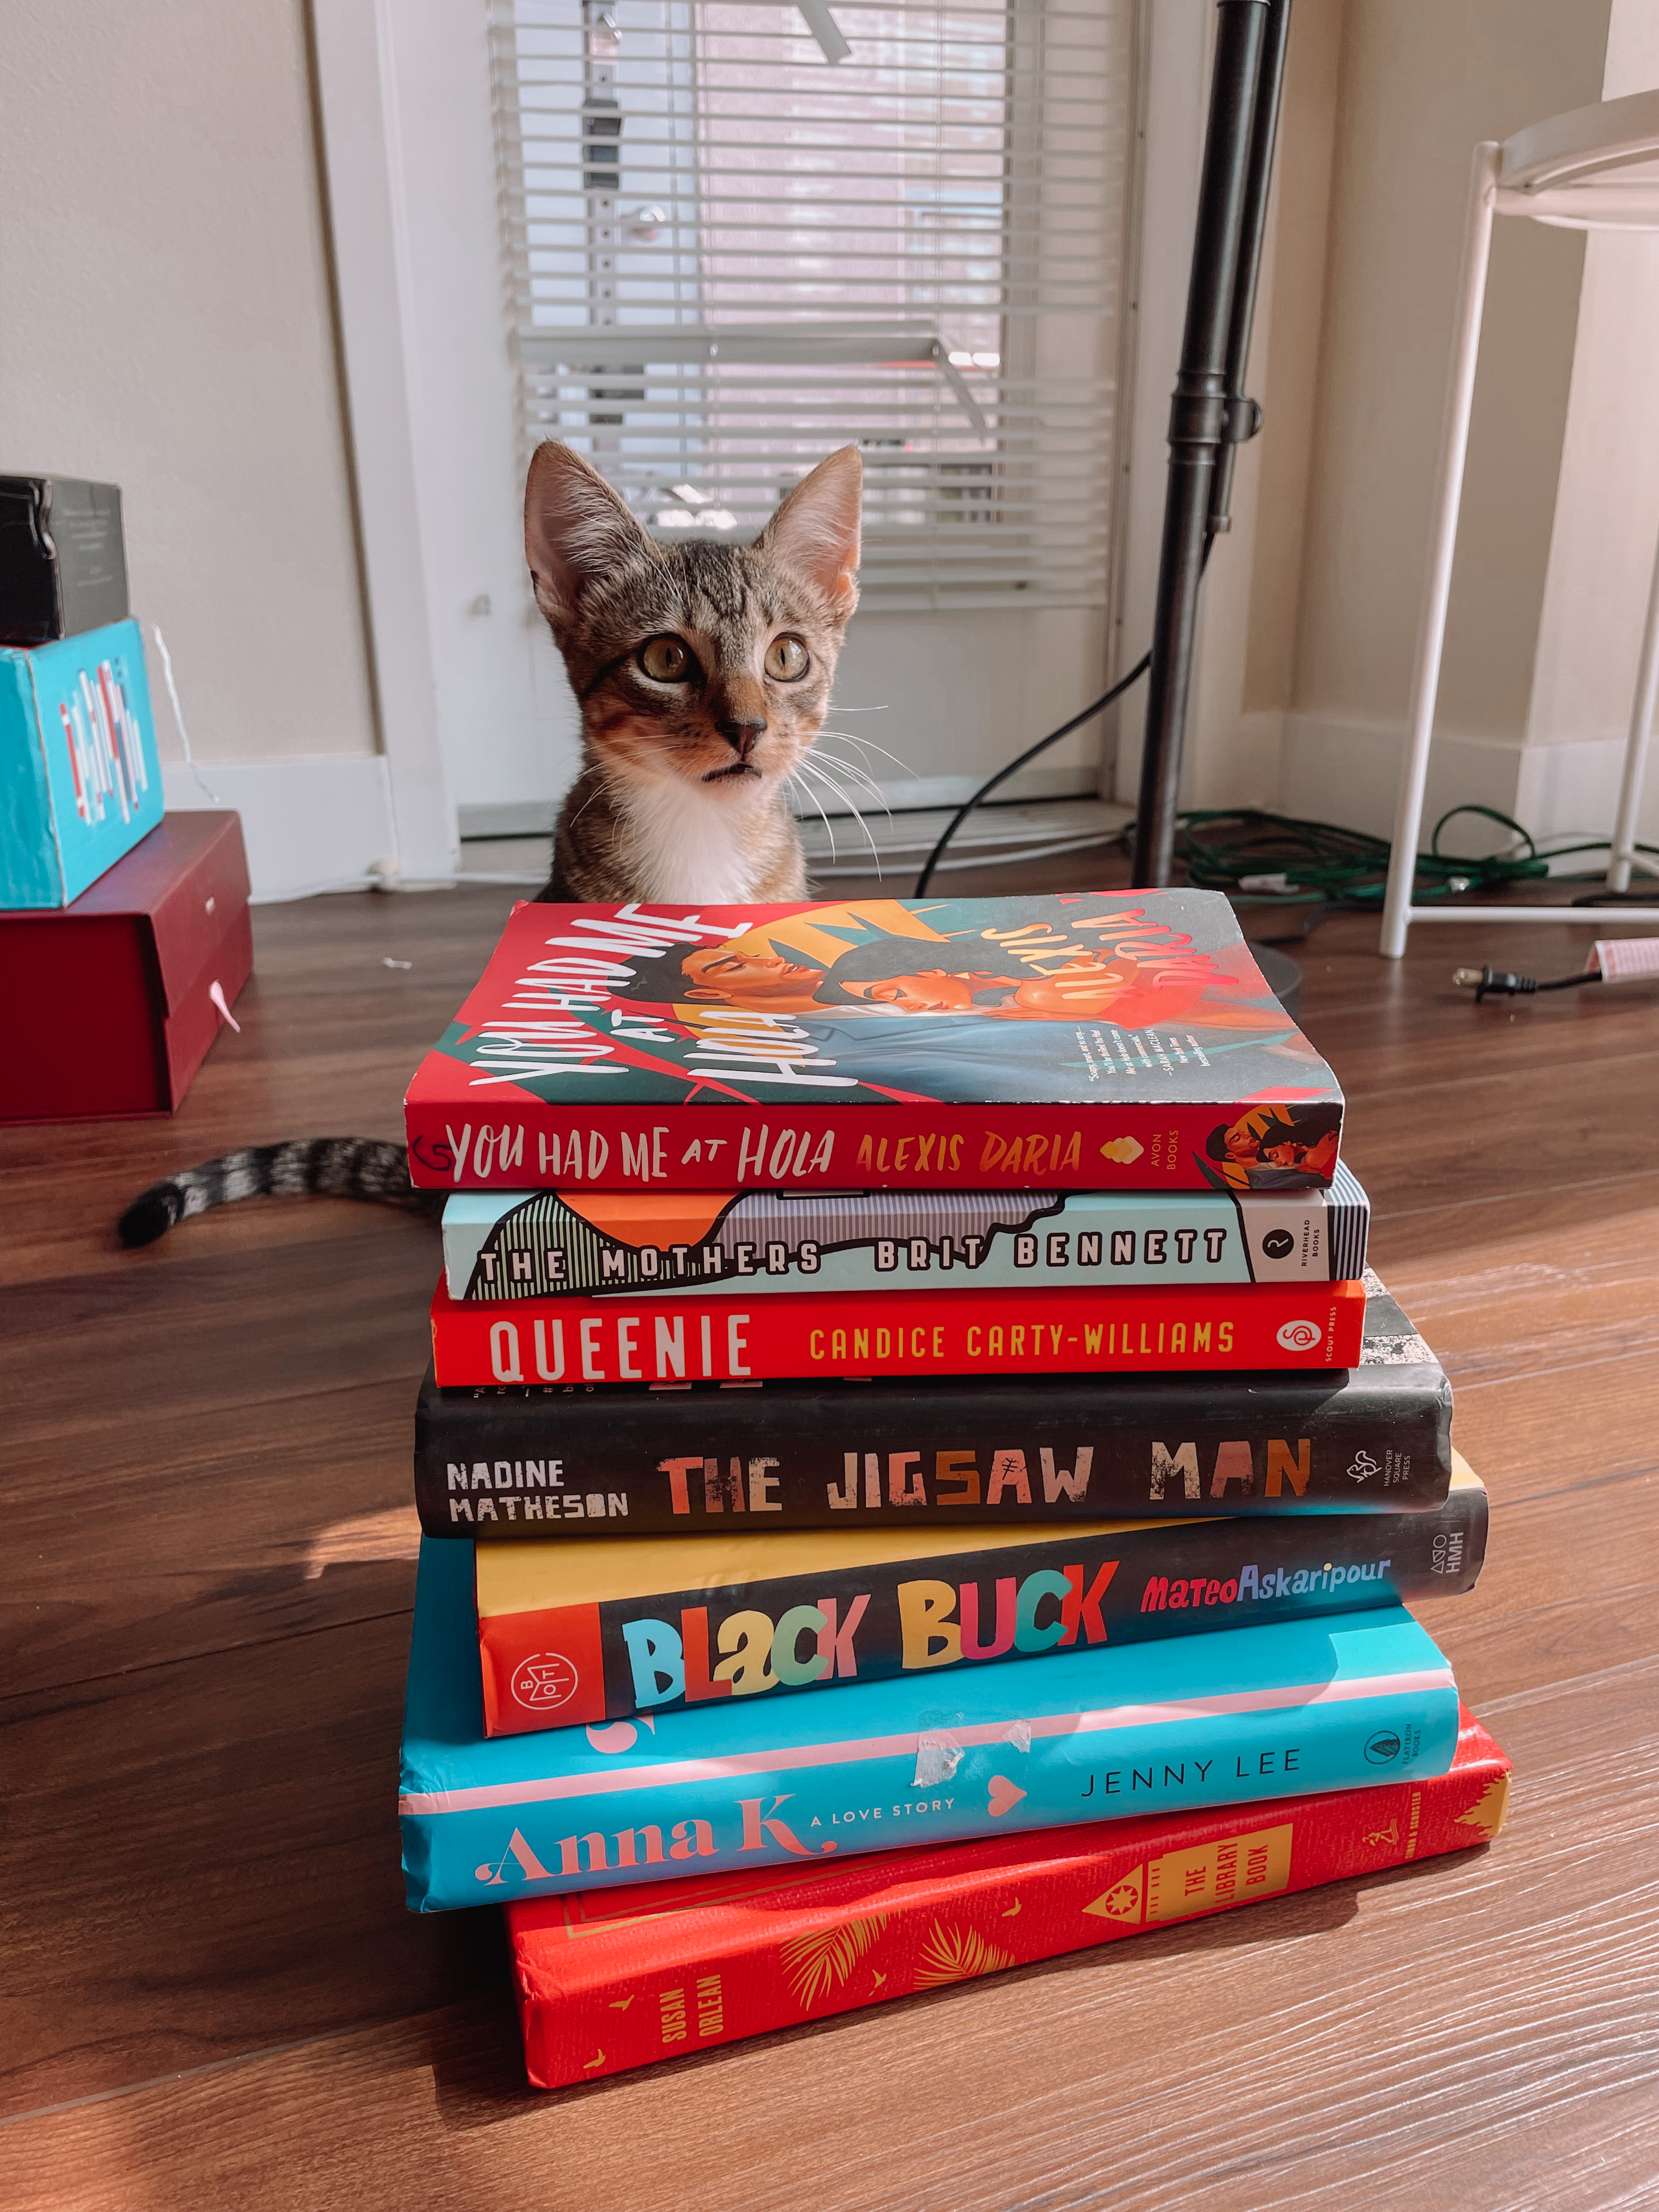 A kitten poses next to a stack of affordable secondhand books in Santa Clara, California.